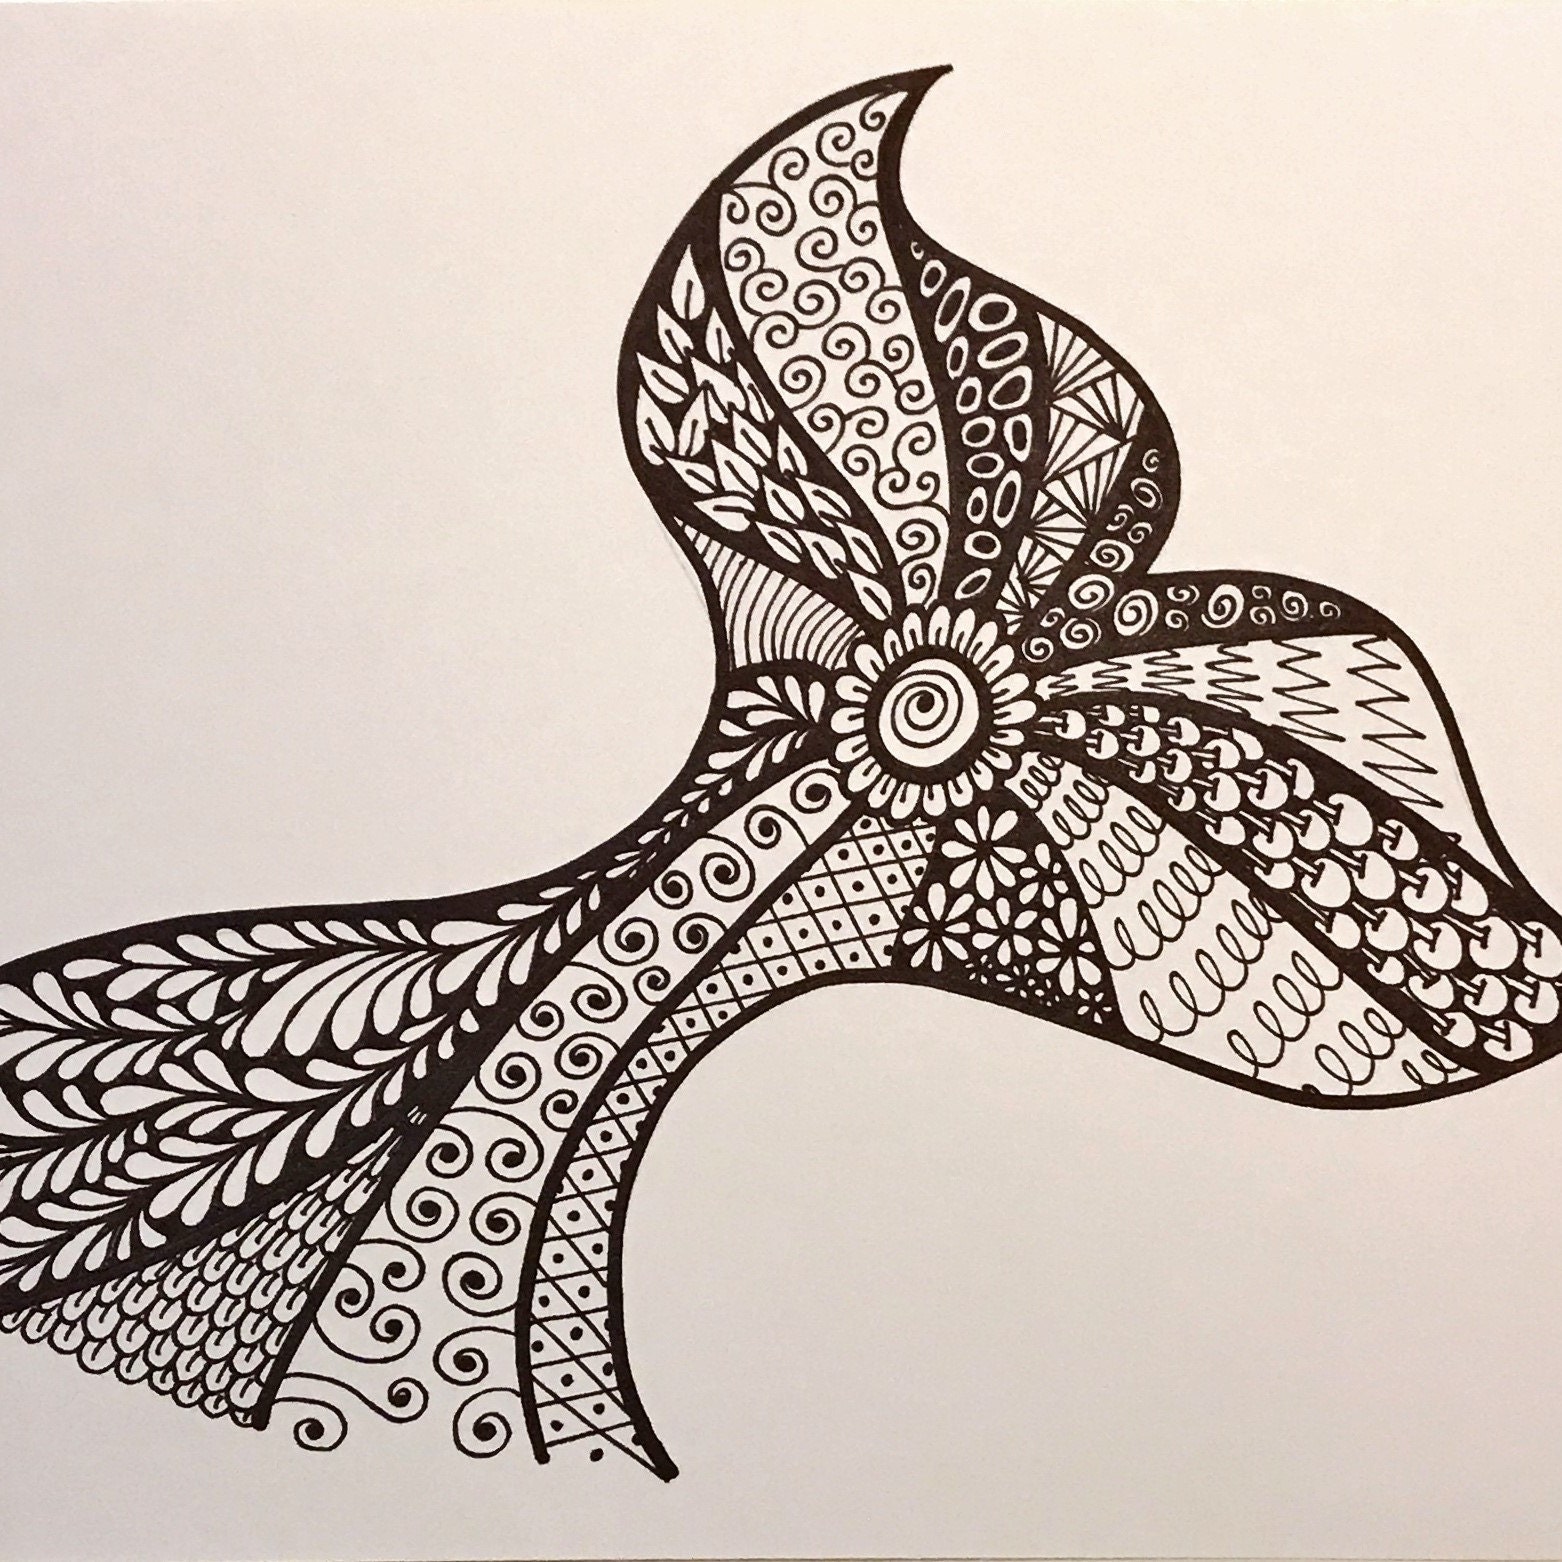 Turtle Zentangle Doodle Print For Download Etsy